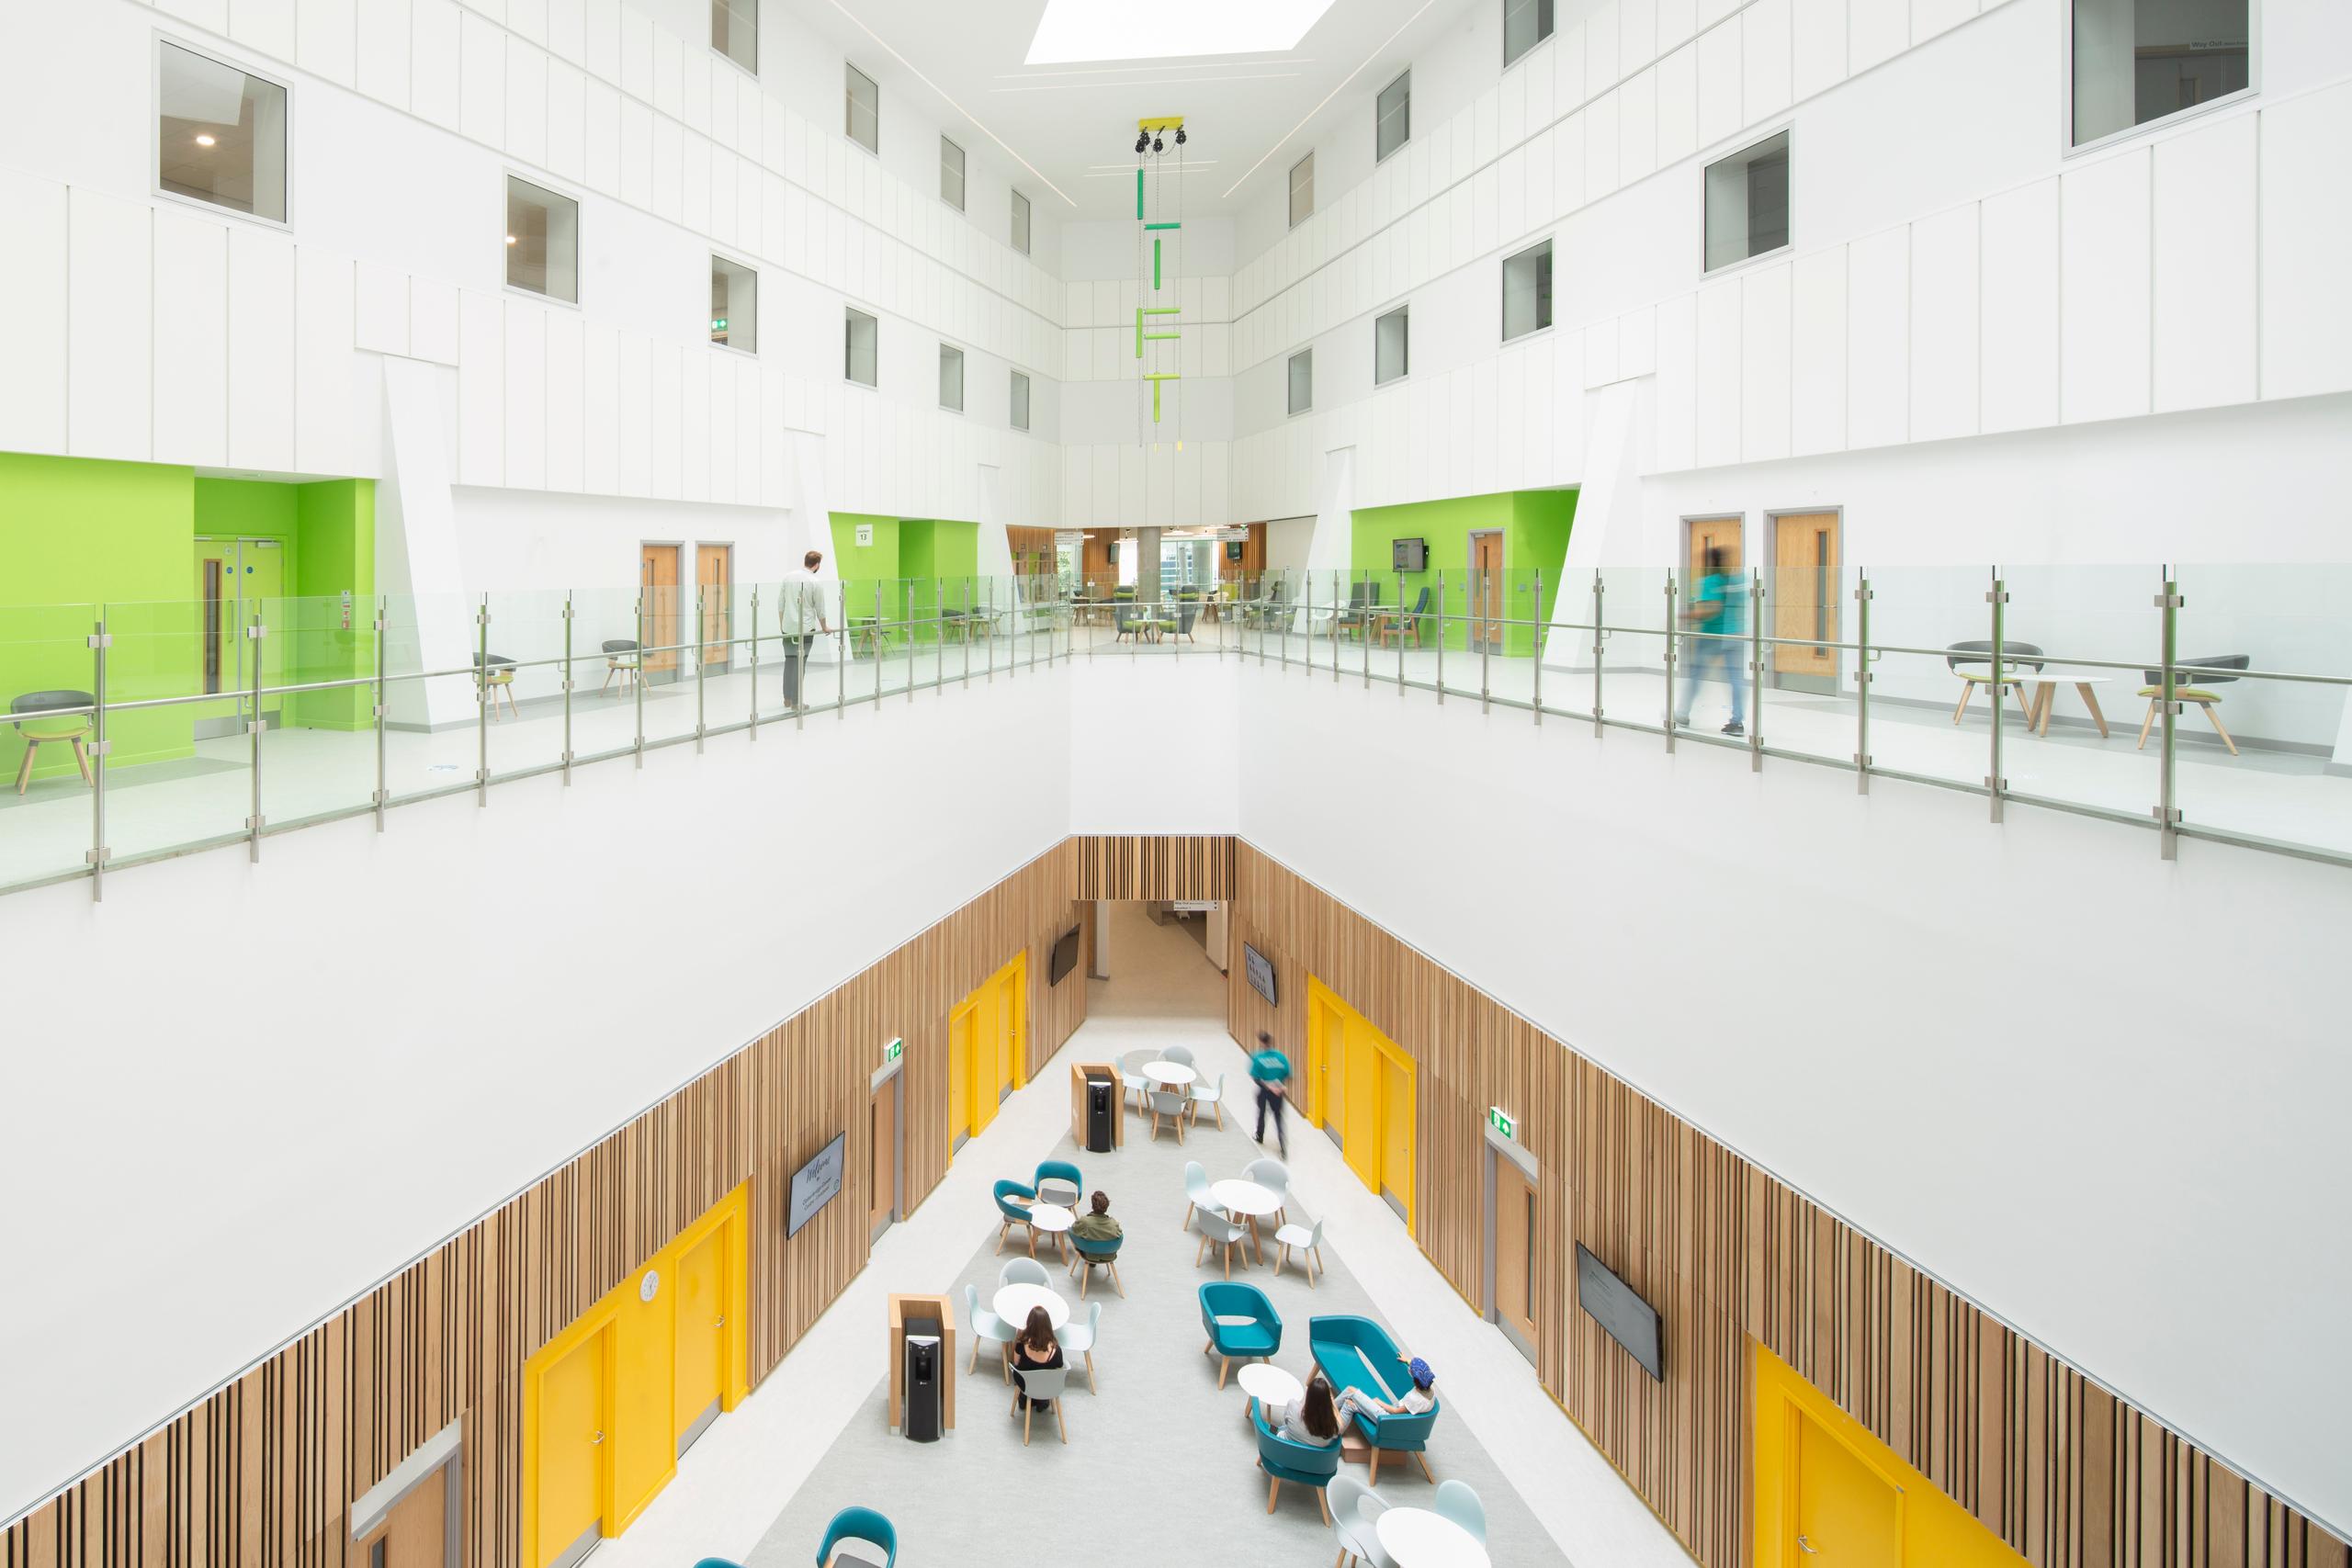 overlooking an atrium inside the Clatterbridge Cancer Centre which has wooden walls and yellow doorways on the lower level and crisp white walls and lime green doorways on the second level with skylights overhead